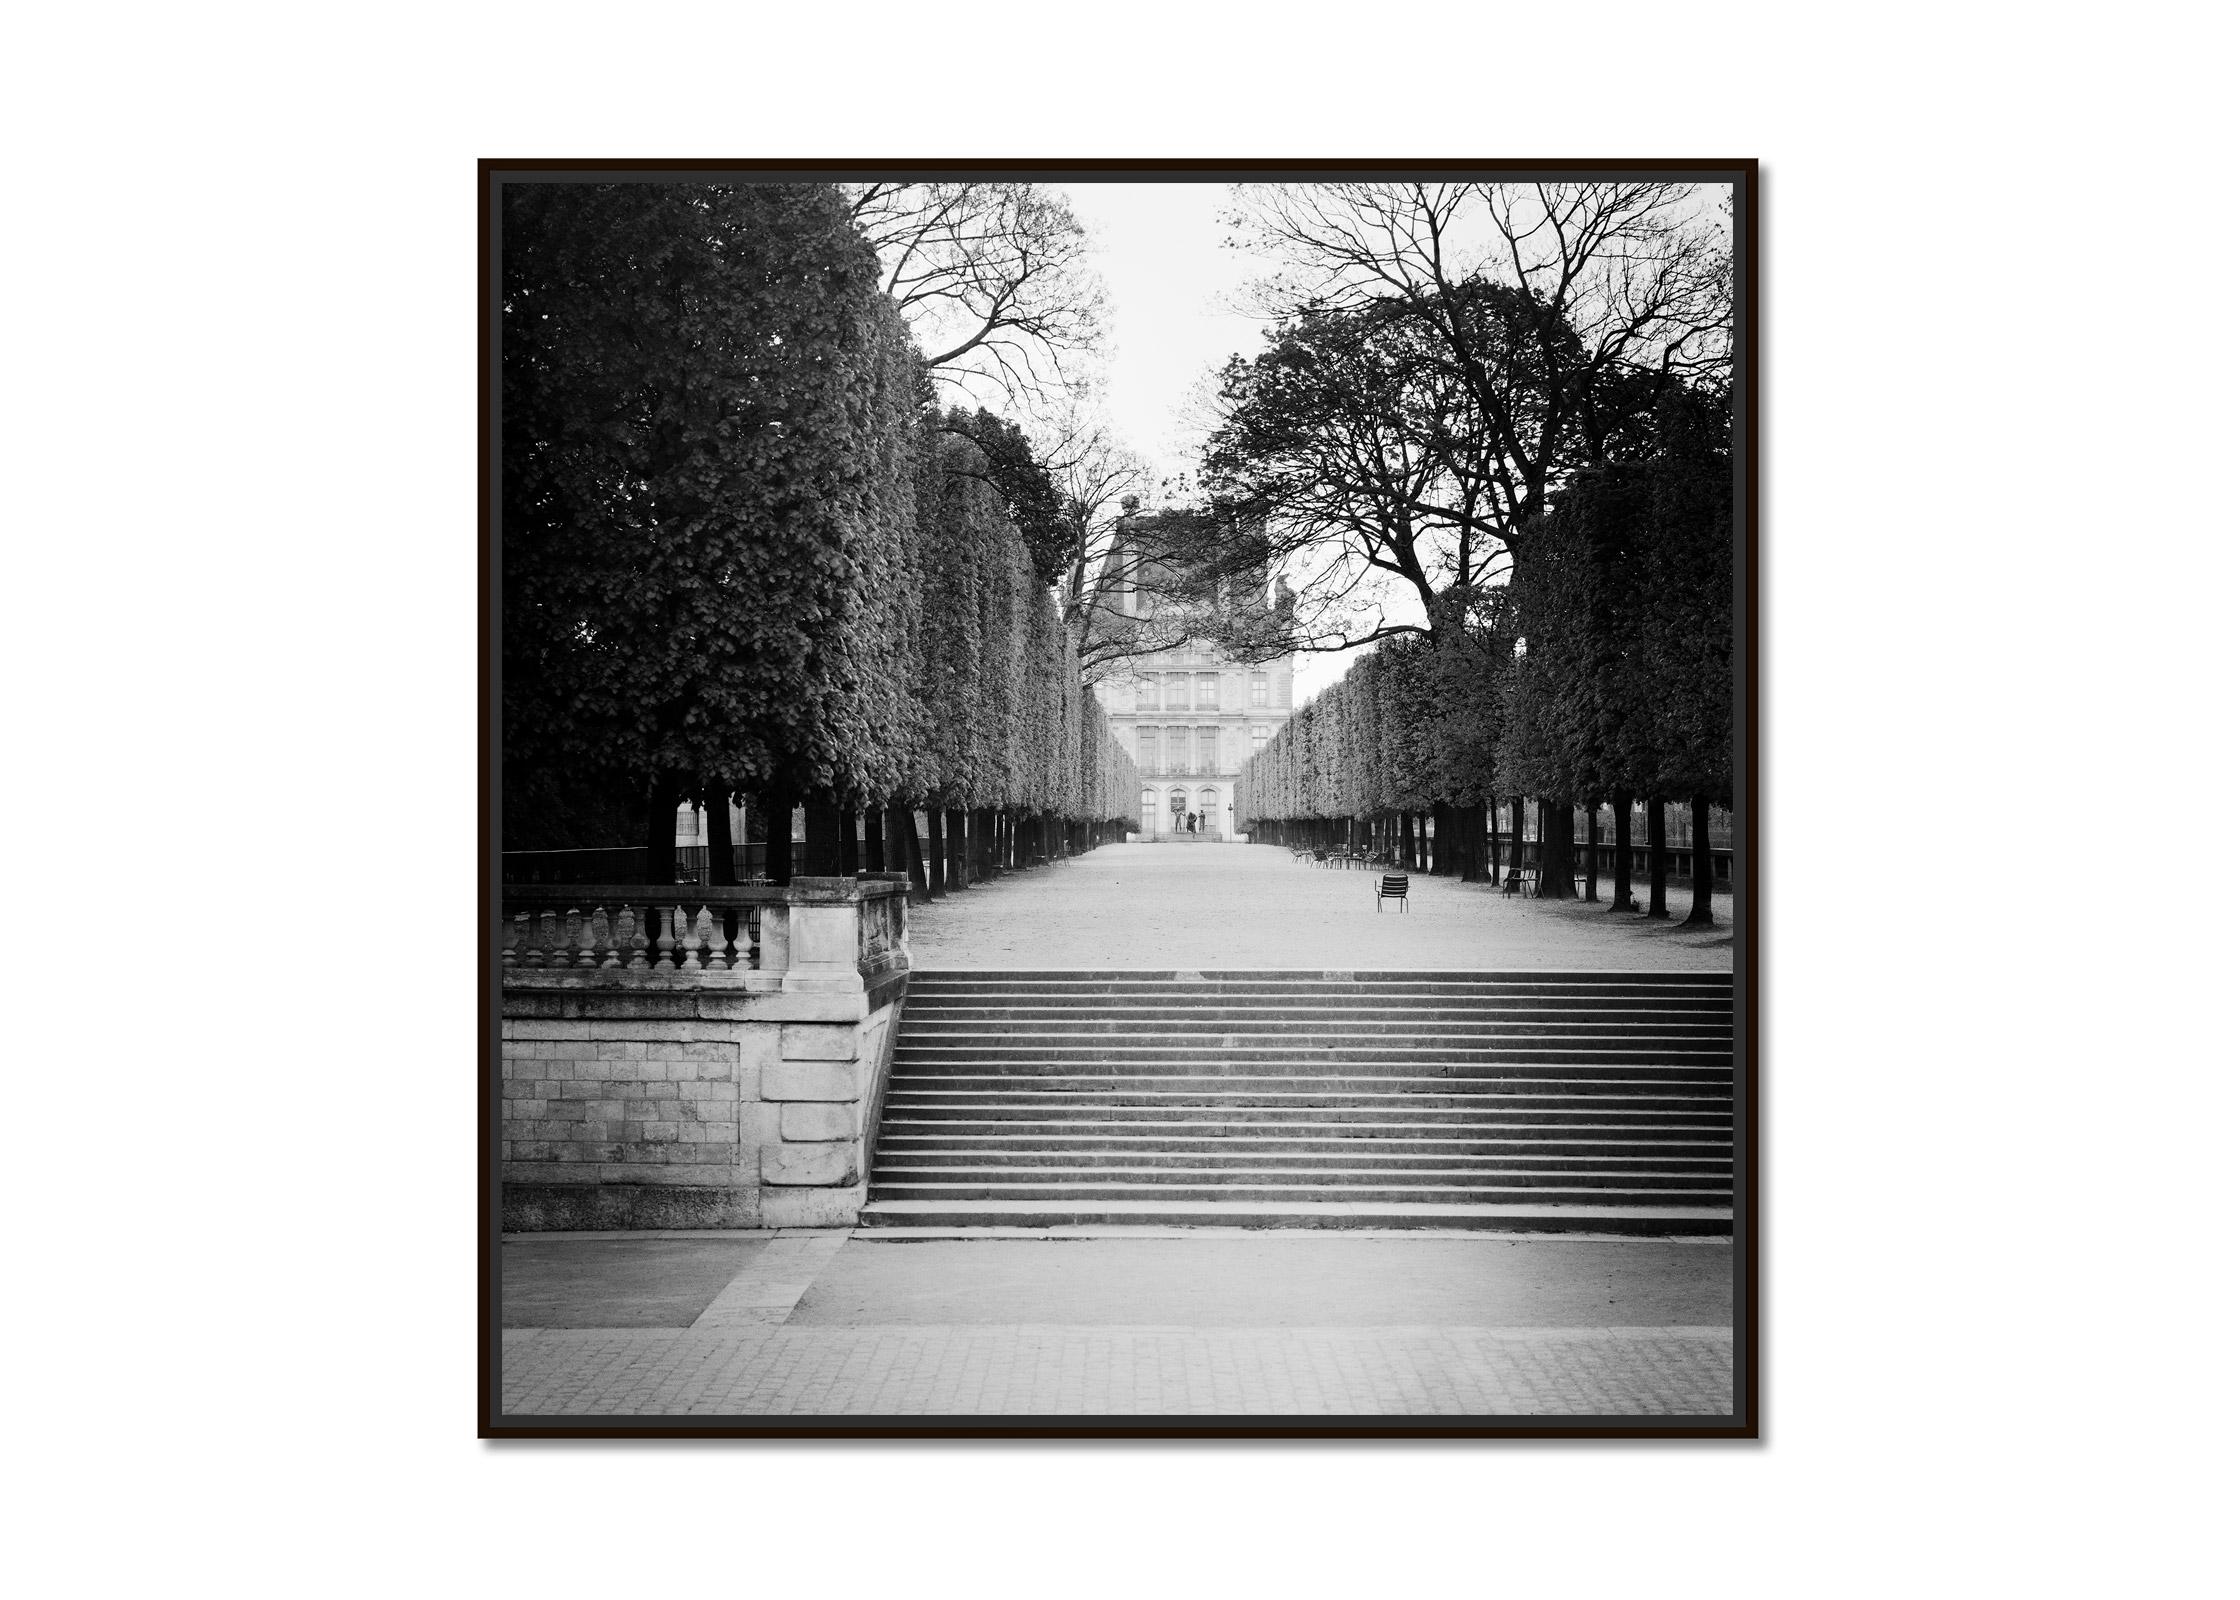 Black and White Fine Art landscape photography. Way through the tree avenue to the Pavillon de Flore at the Louvre in Paris, France. Archival pigment ink print, edition of 9. Signed, titled, dated and numbered by artist. Certificate of authenticity